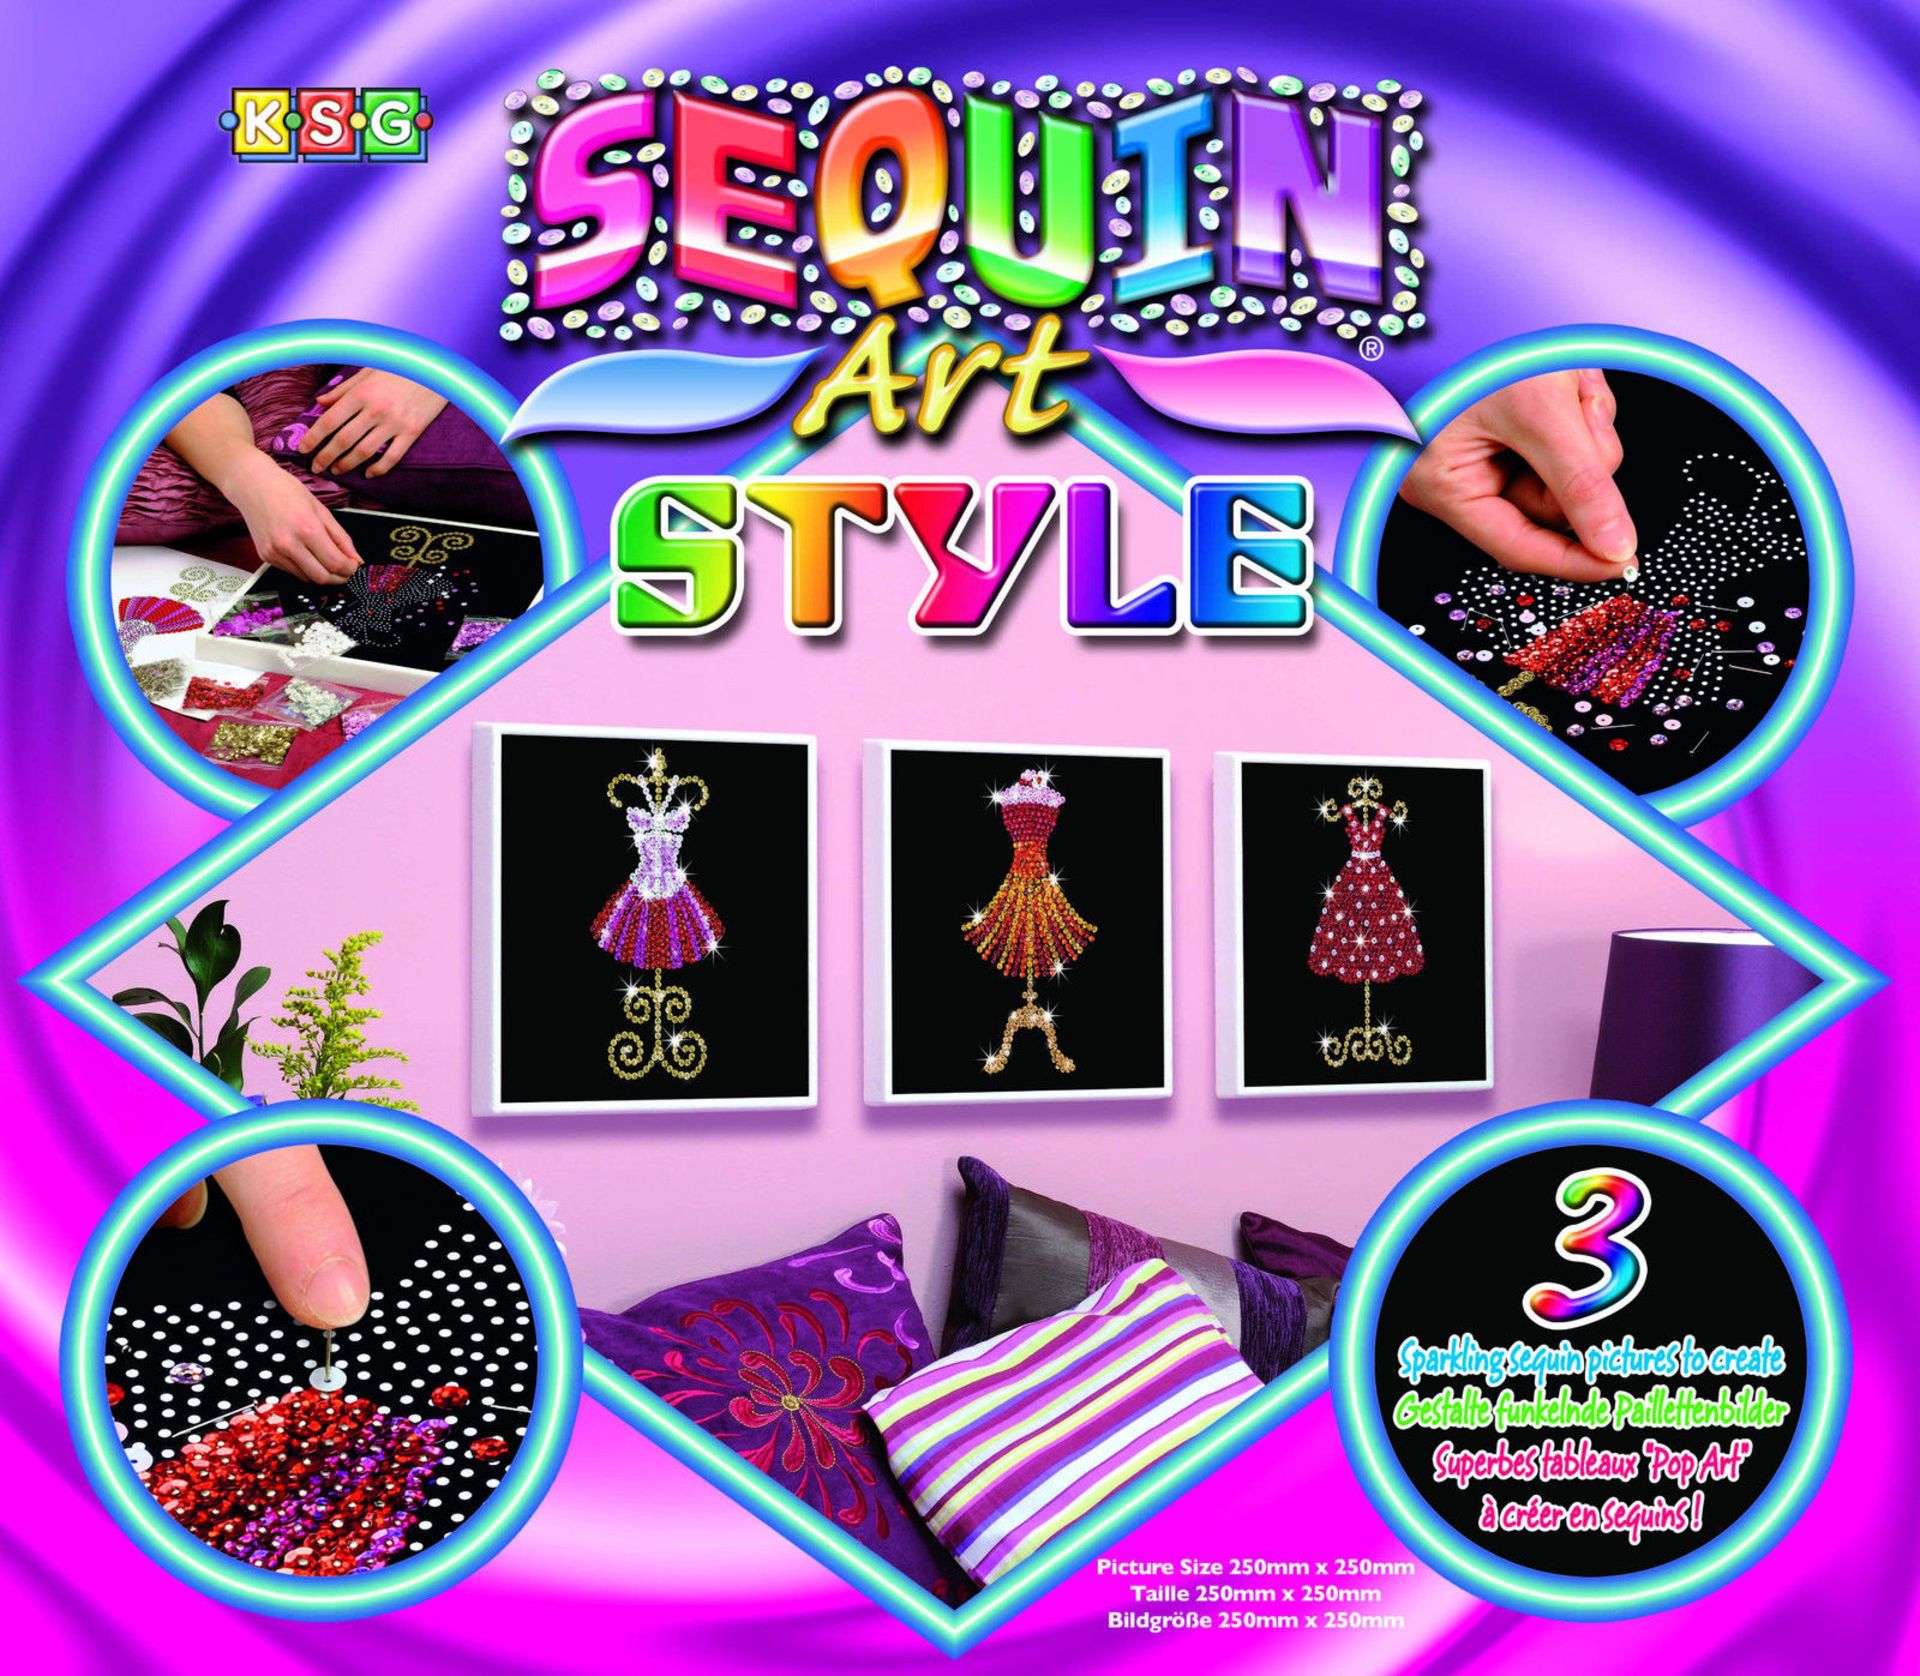 V Brand New Sequin Art Three Sparkling Sequin Pictures To Create-Party Dresses ISP £19.99 (Ebay)